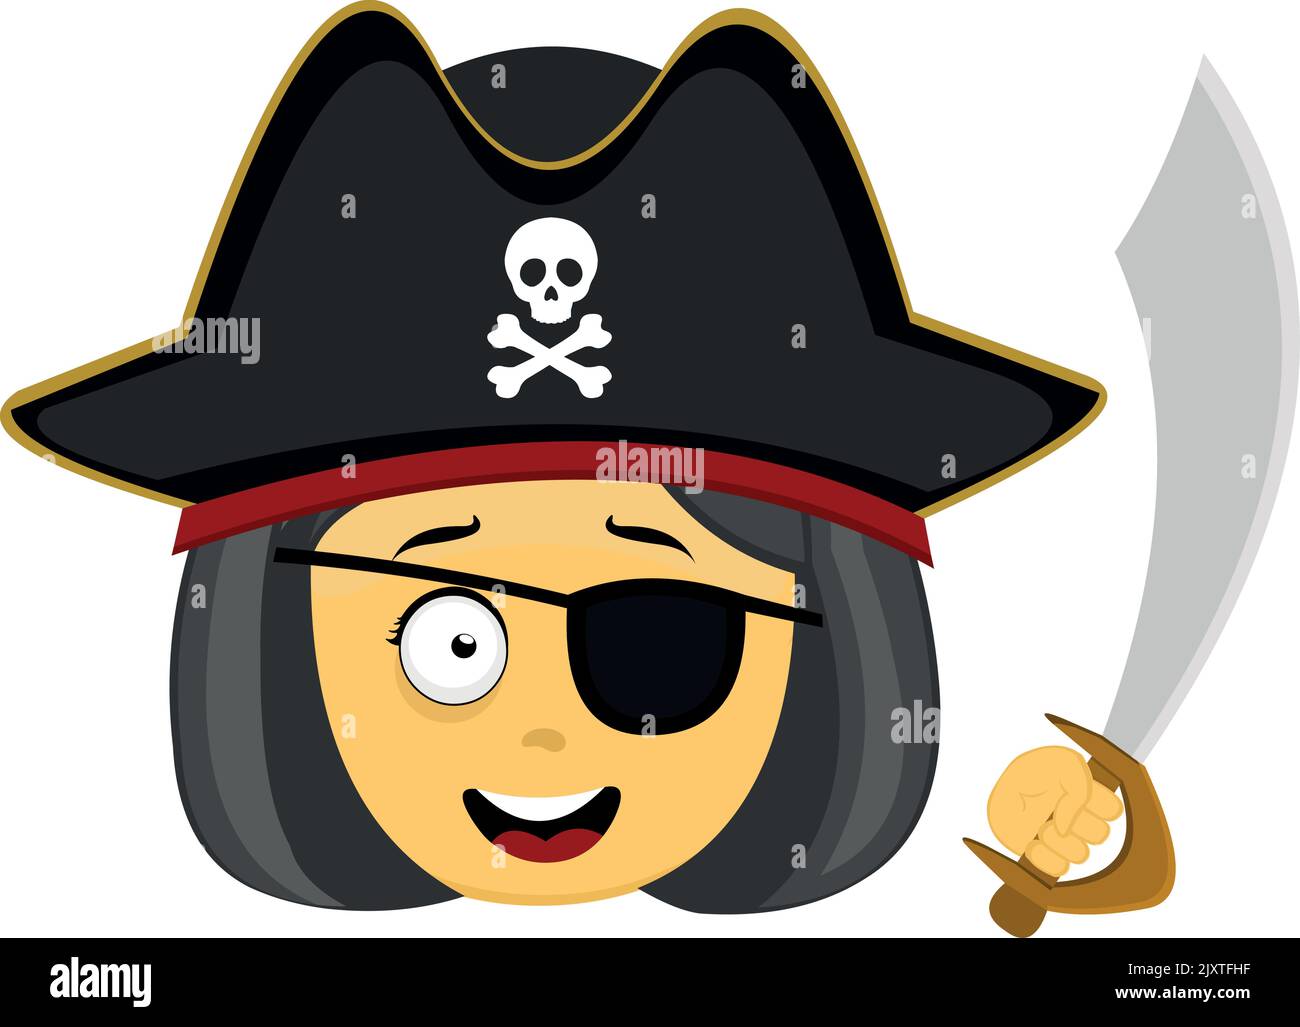 Vector illustration of emoticon of the face of a cartoon pirate woman in yellow, with a hat, eye patch and a sword in her hand Stock Vector